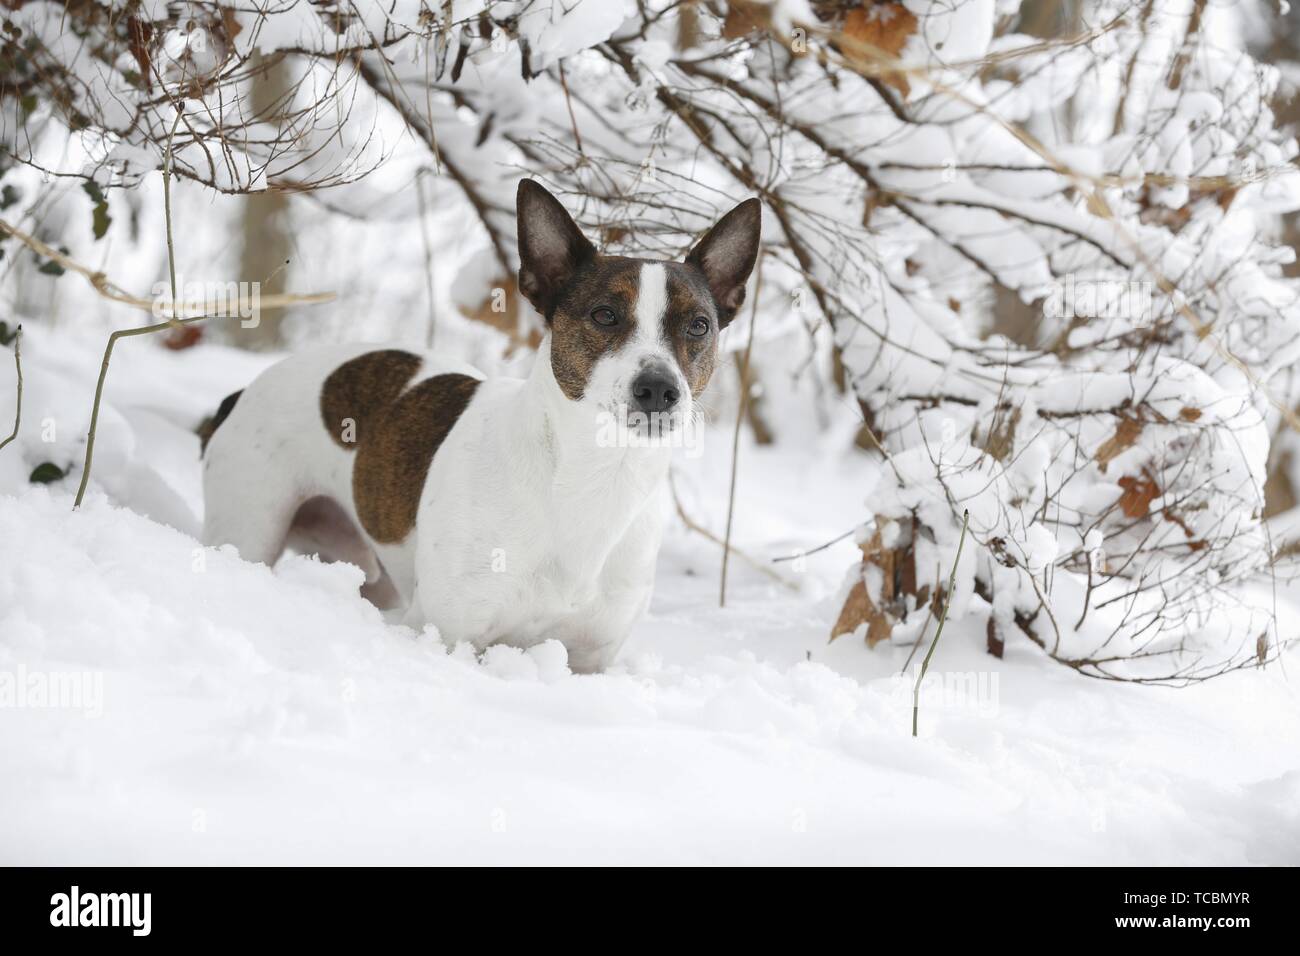 Jack Russell Terrier in snow Stock Photo